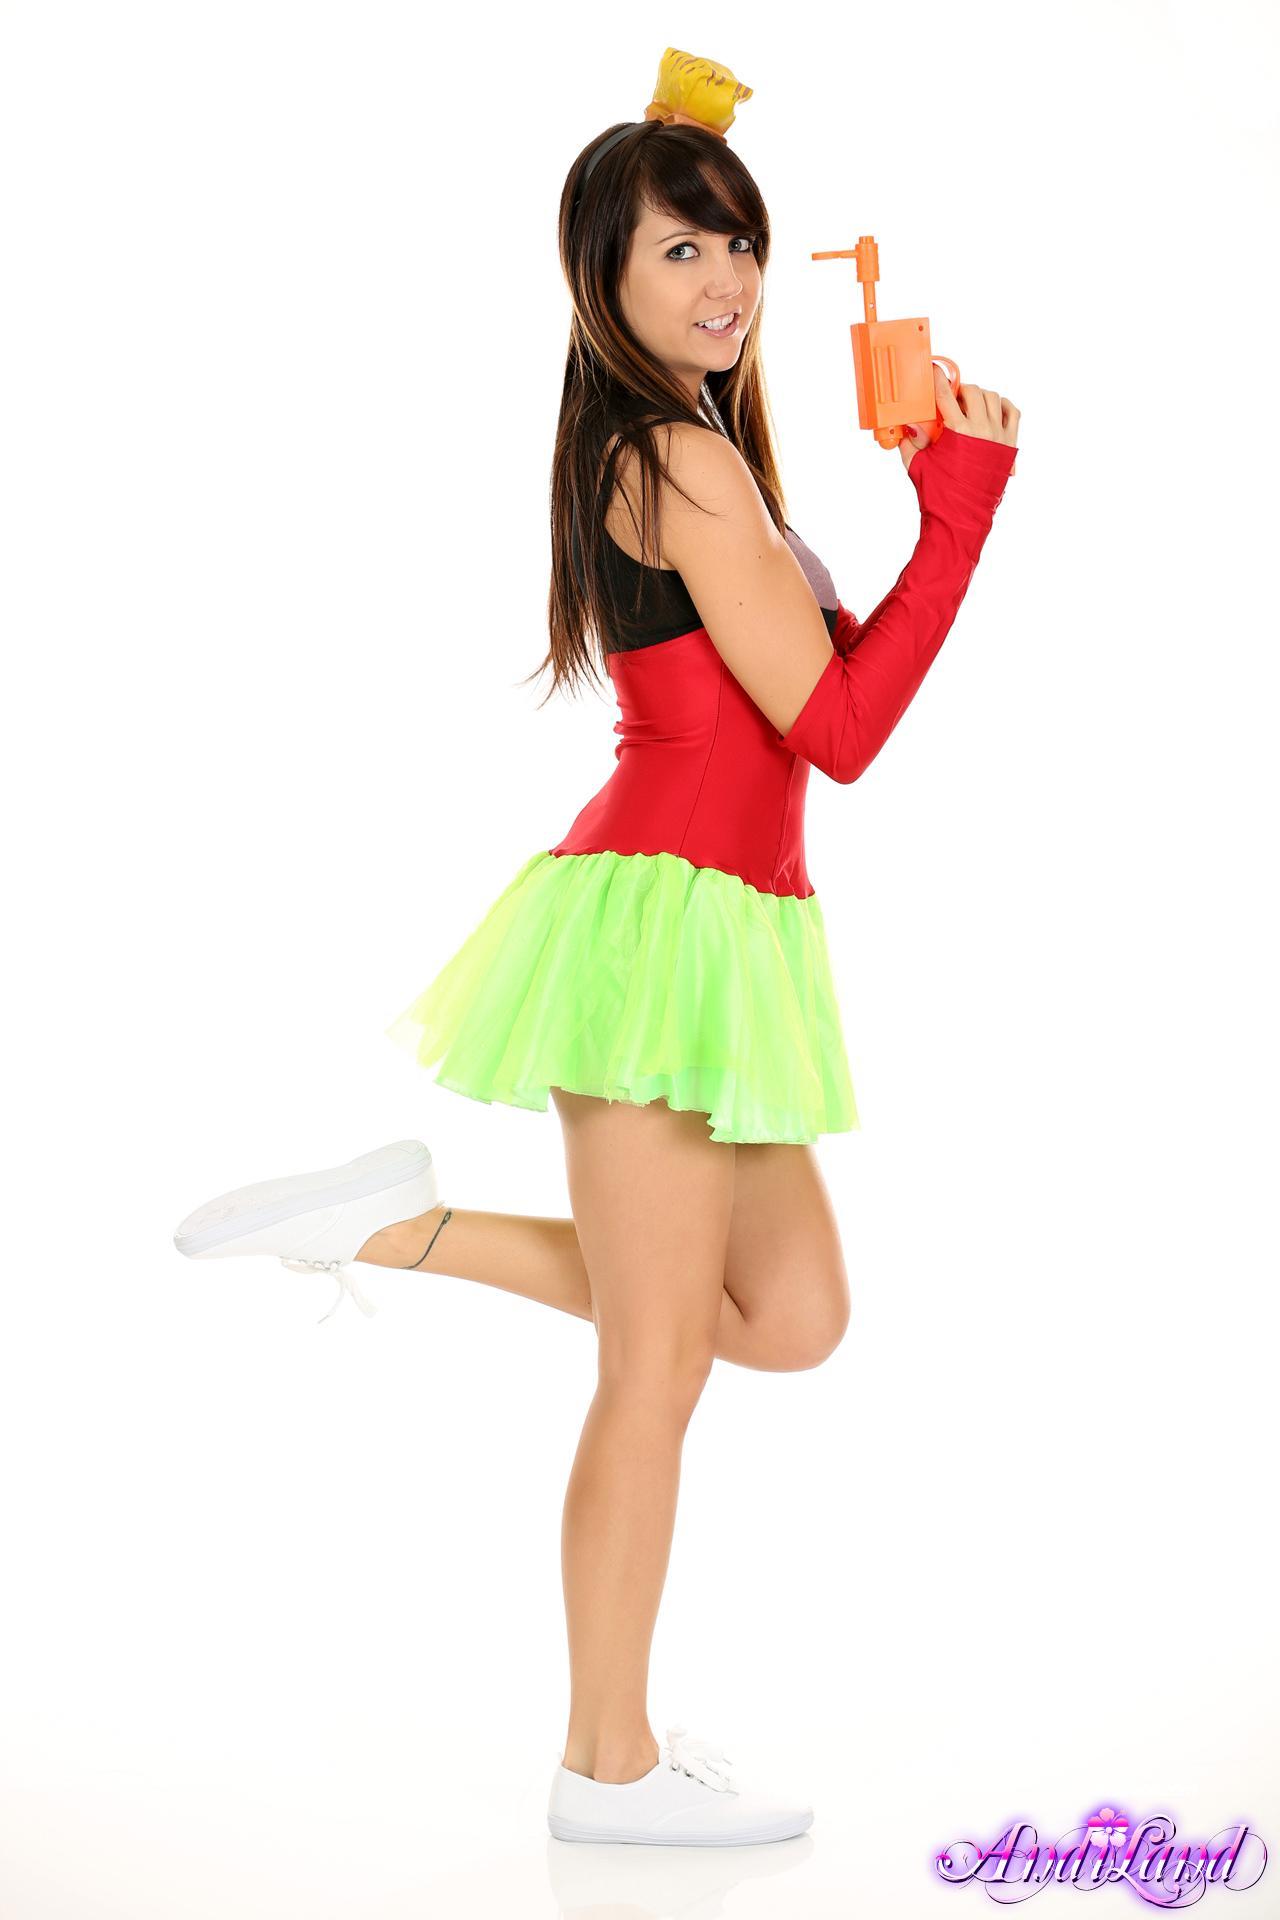 Pictures of teen girl Andi dressed up as Marvin The Martian #53141814